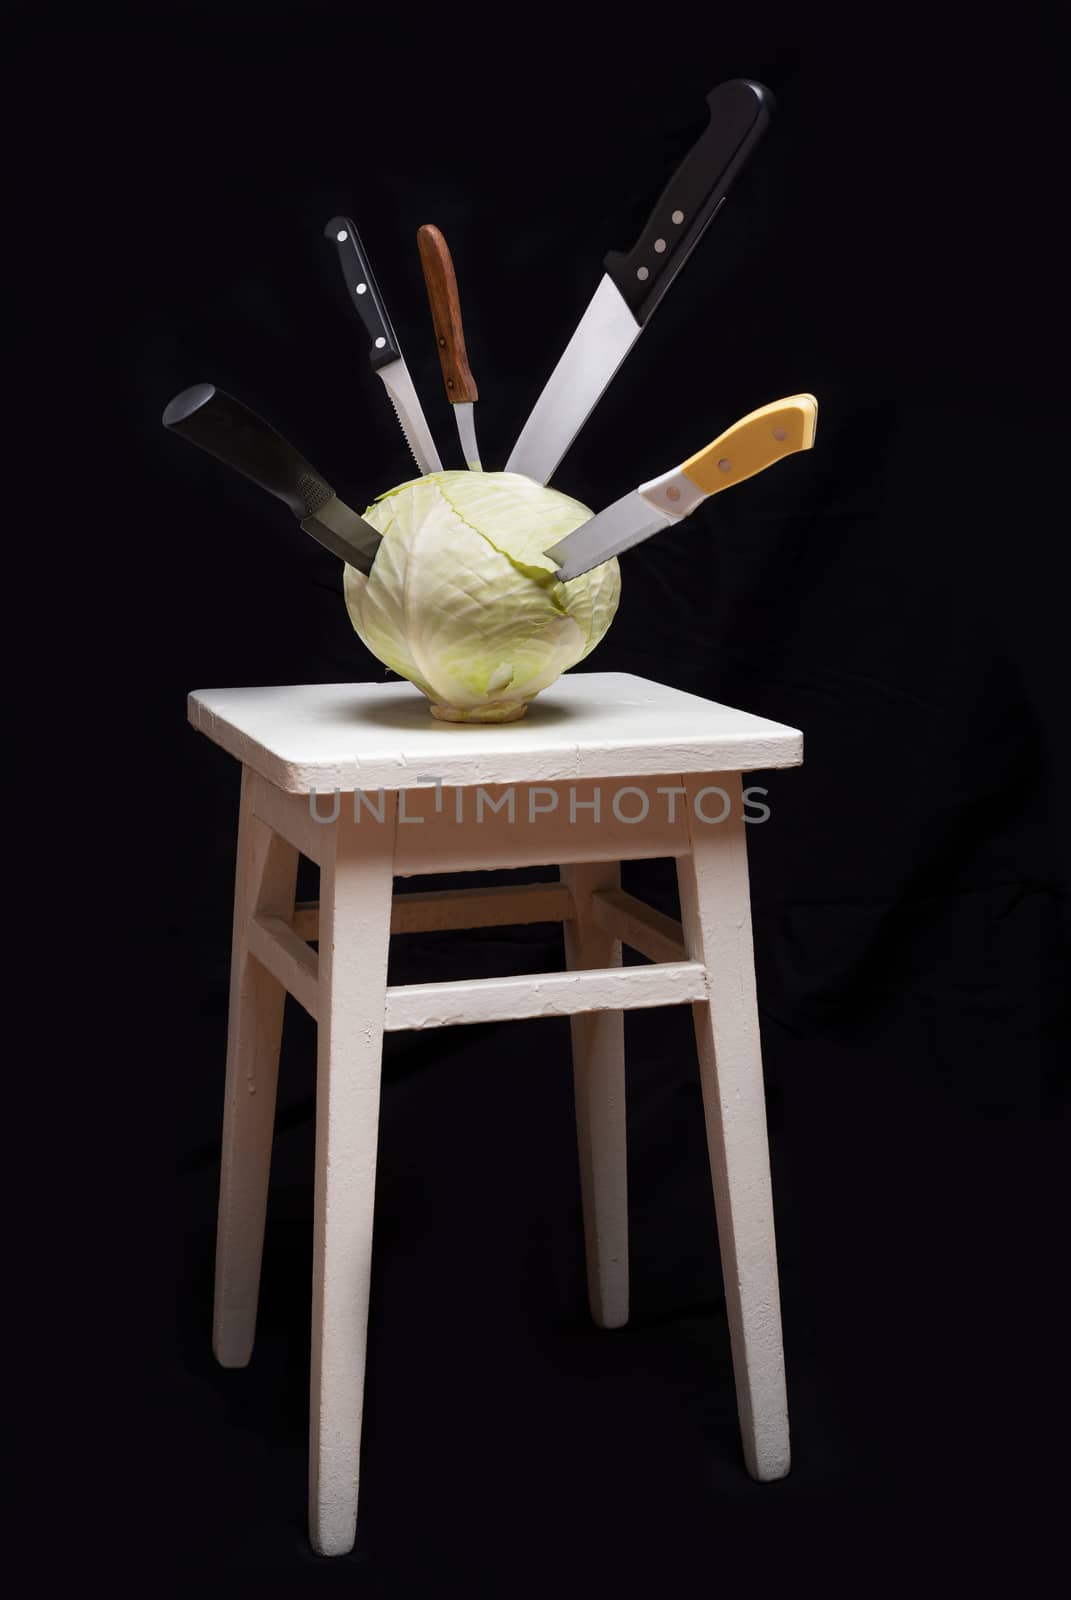 Symbolic conceptual image of a white cabbage on a white wooden stool. Knives are stuck into the vegetable and symbolize cooking, violence, crime, suffering. On black background.